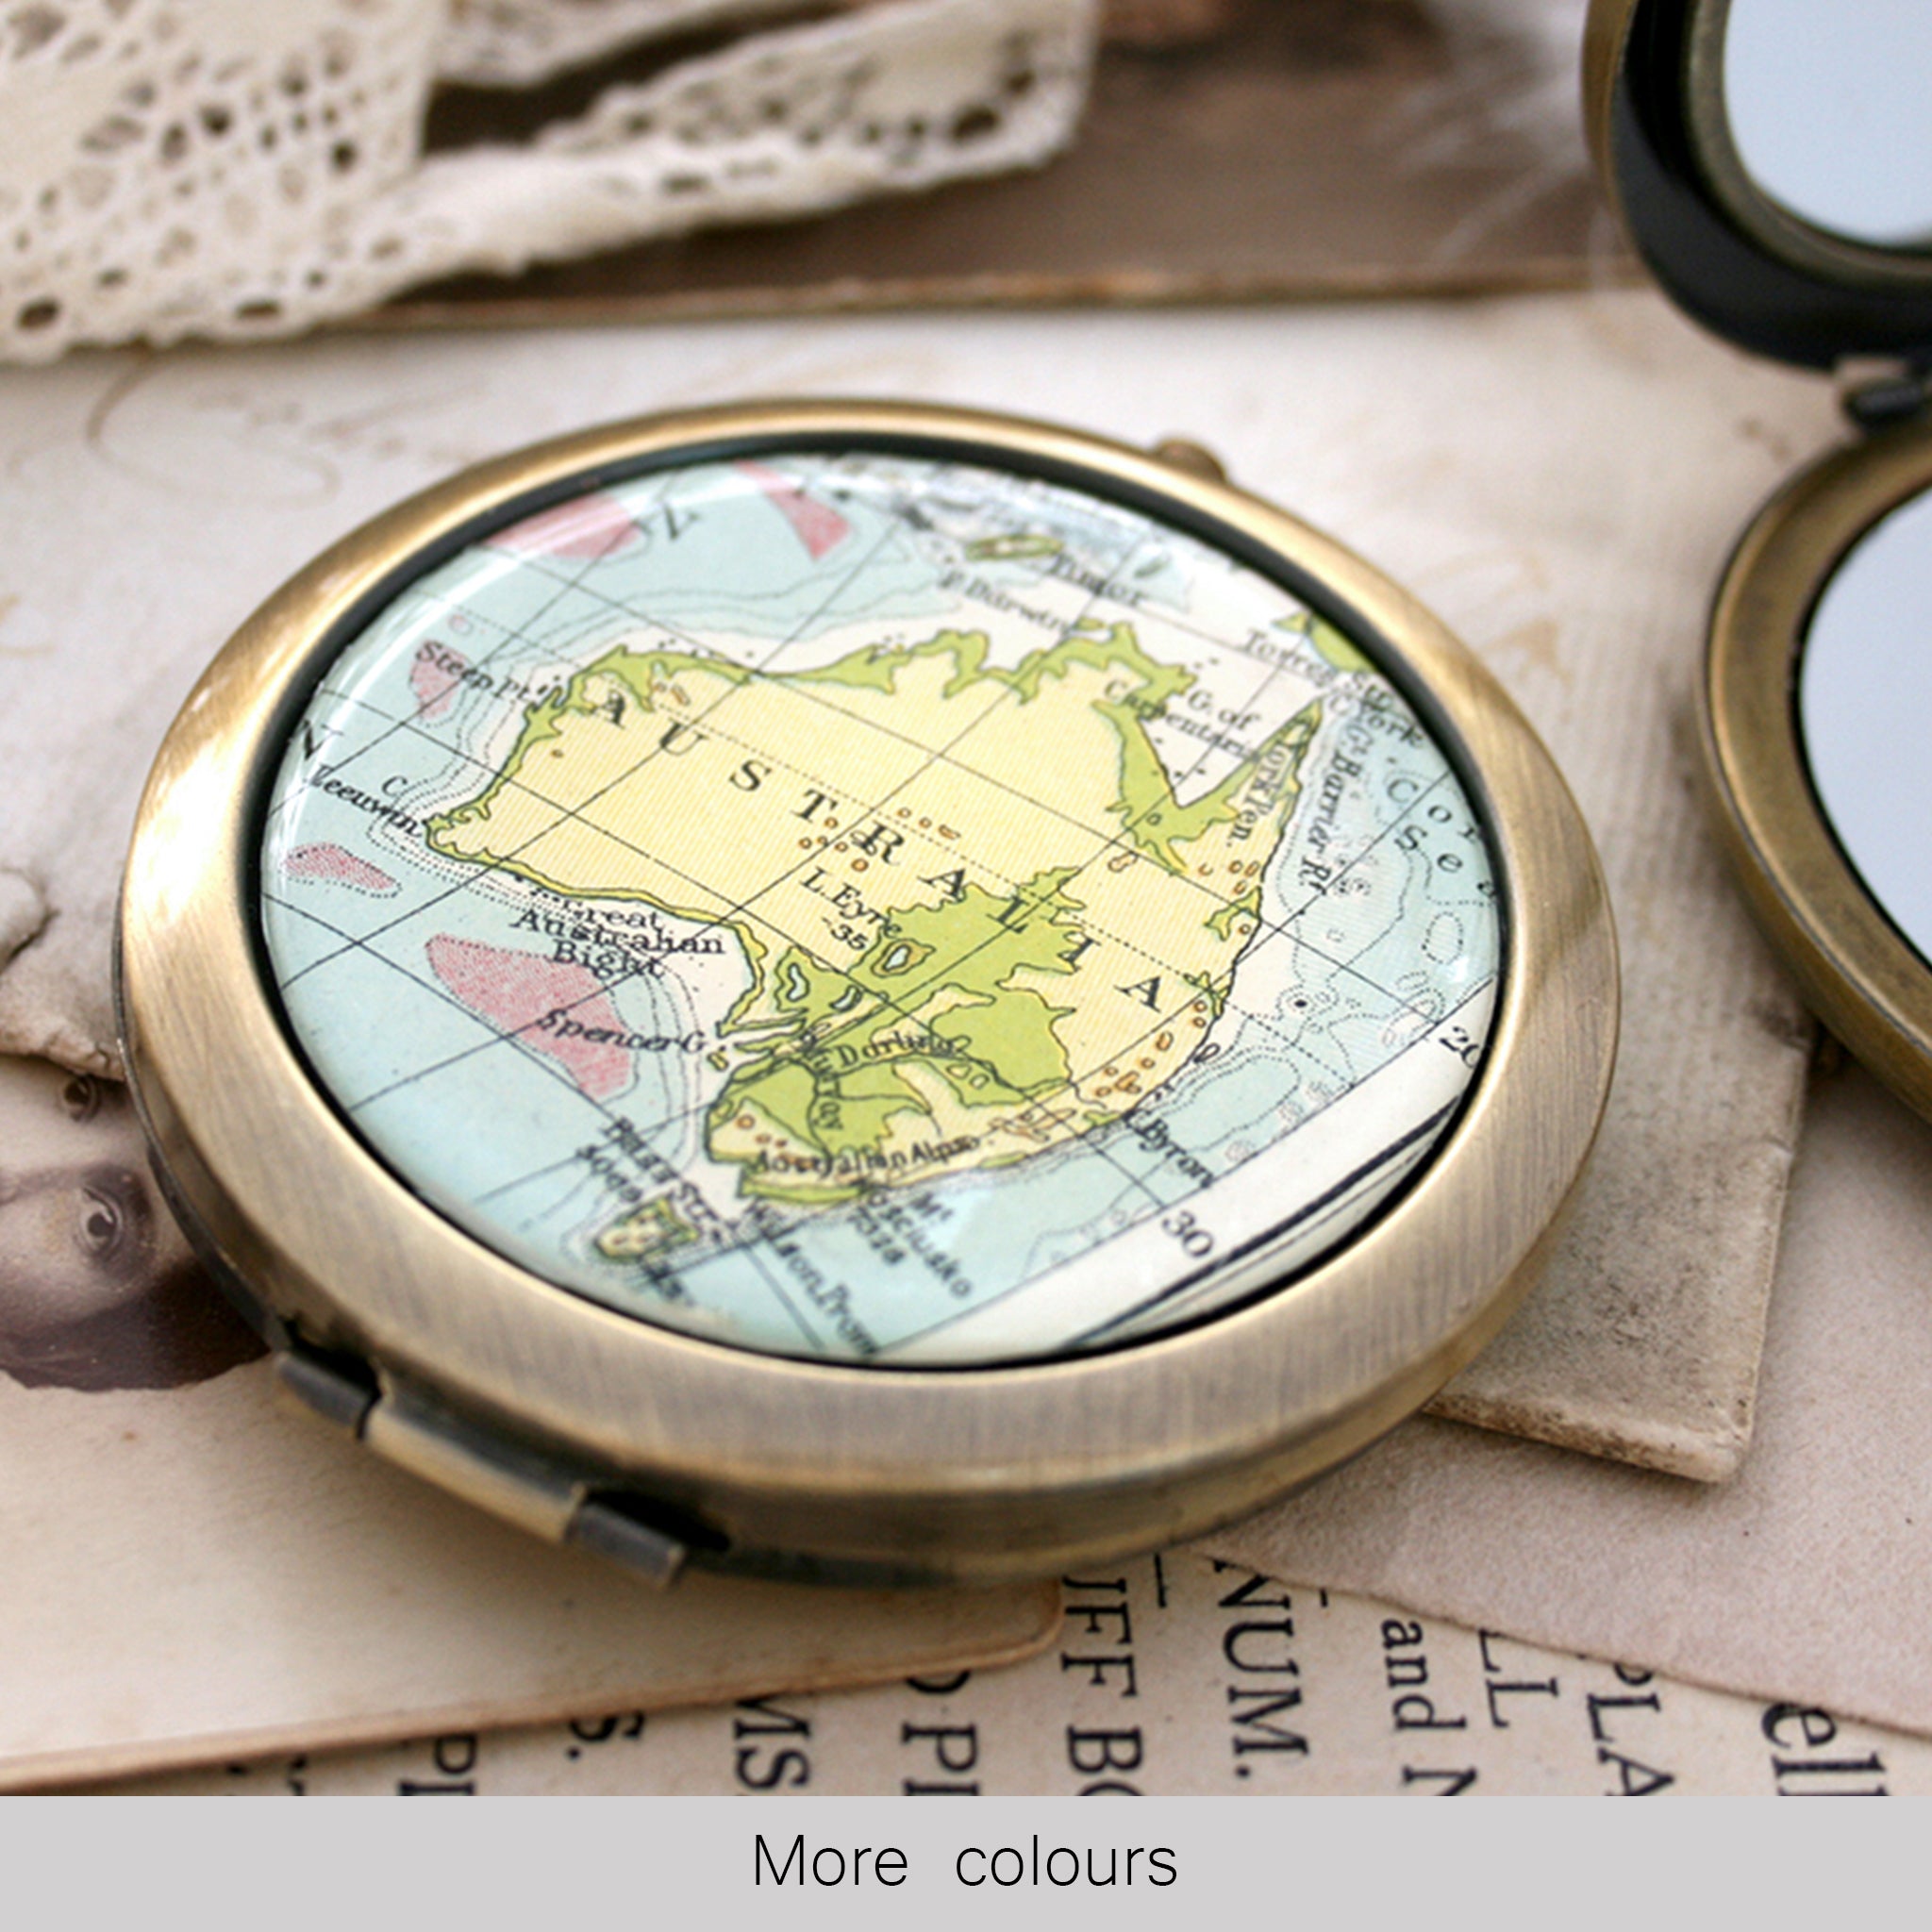 Personalised Compact Mirror in Antique Bronze color featuring map of Australia